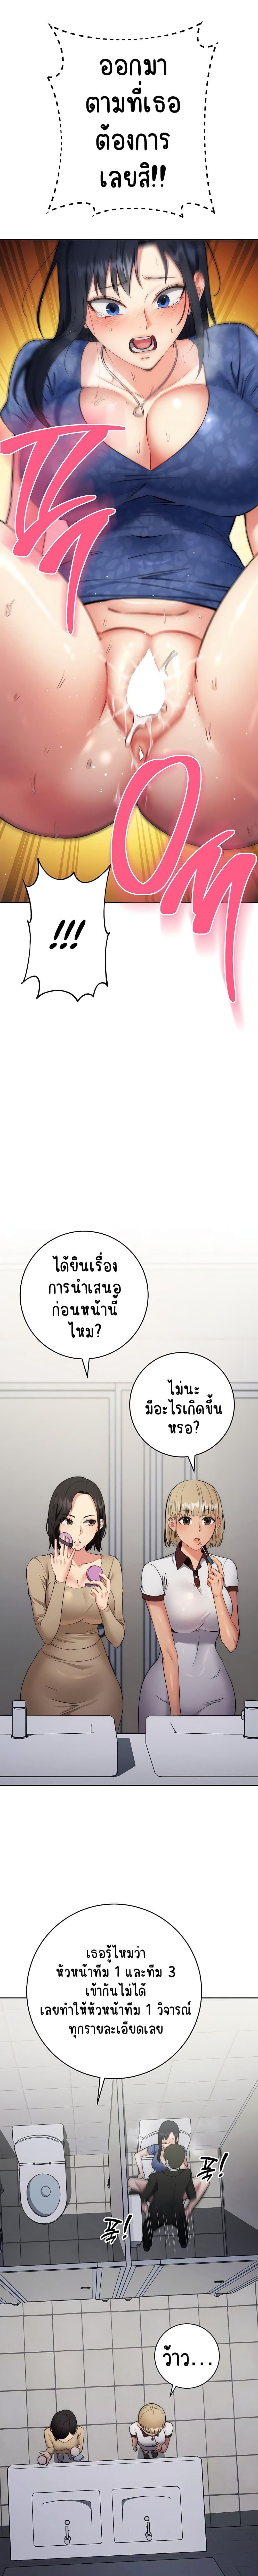 Outsider: The Invisible Man ตอนที่ 6 ภาพ 7